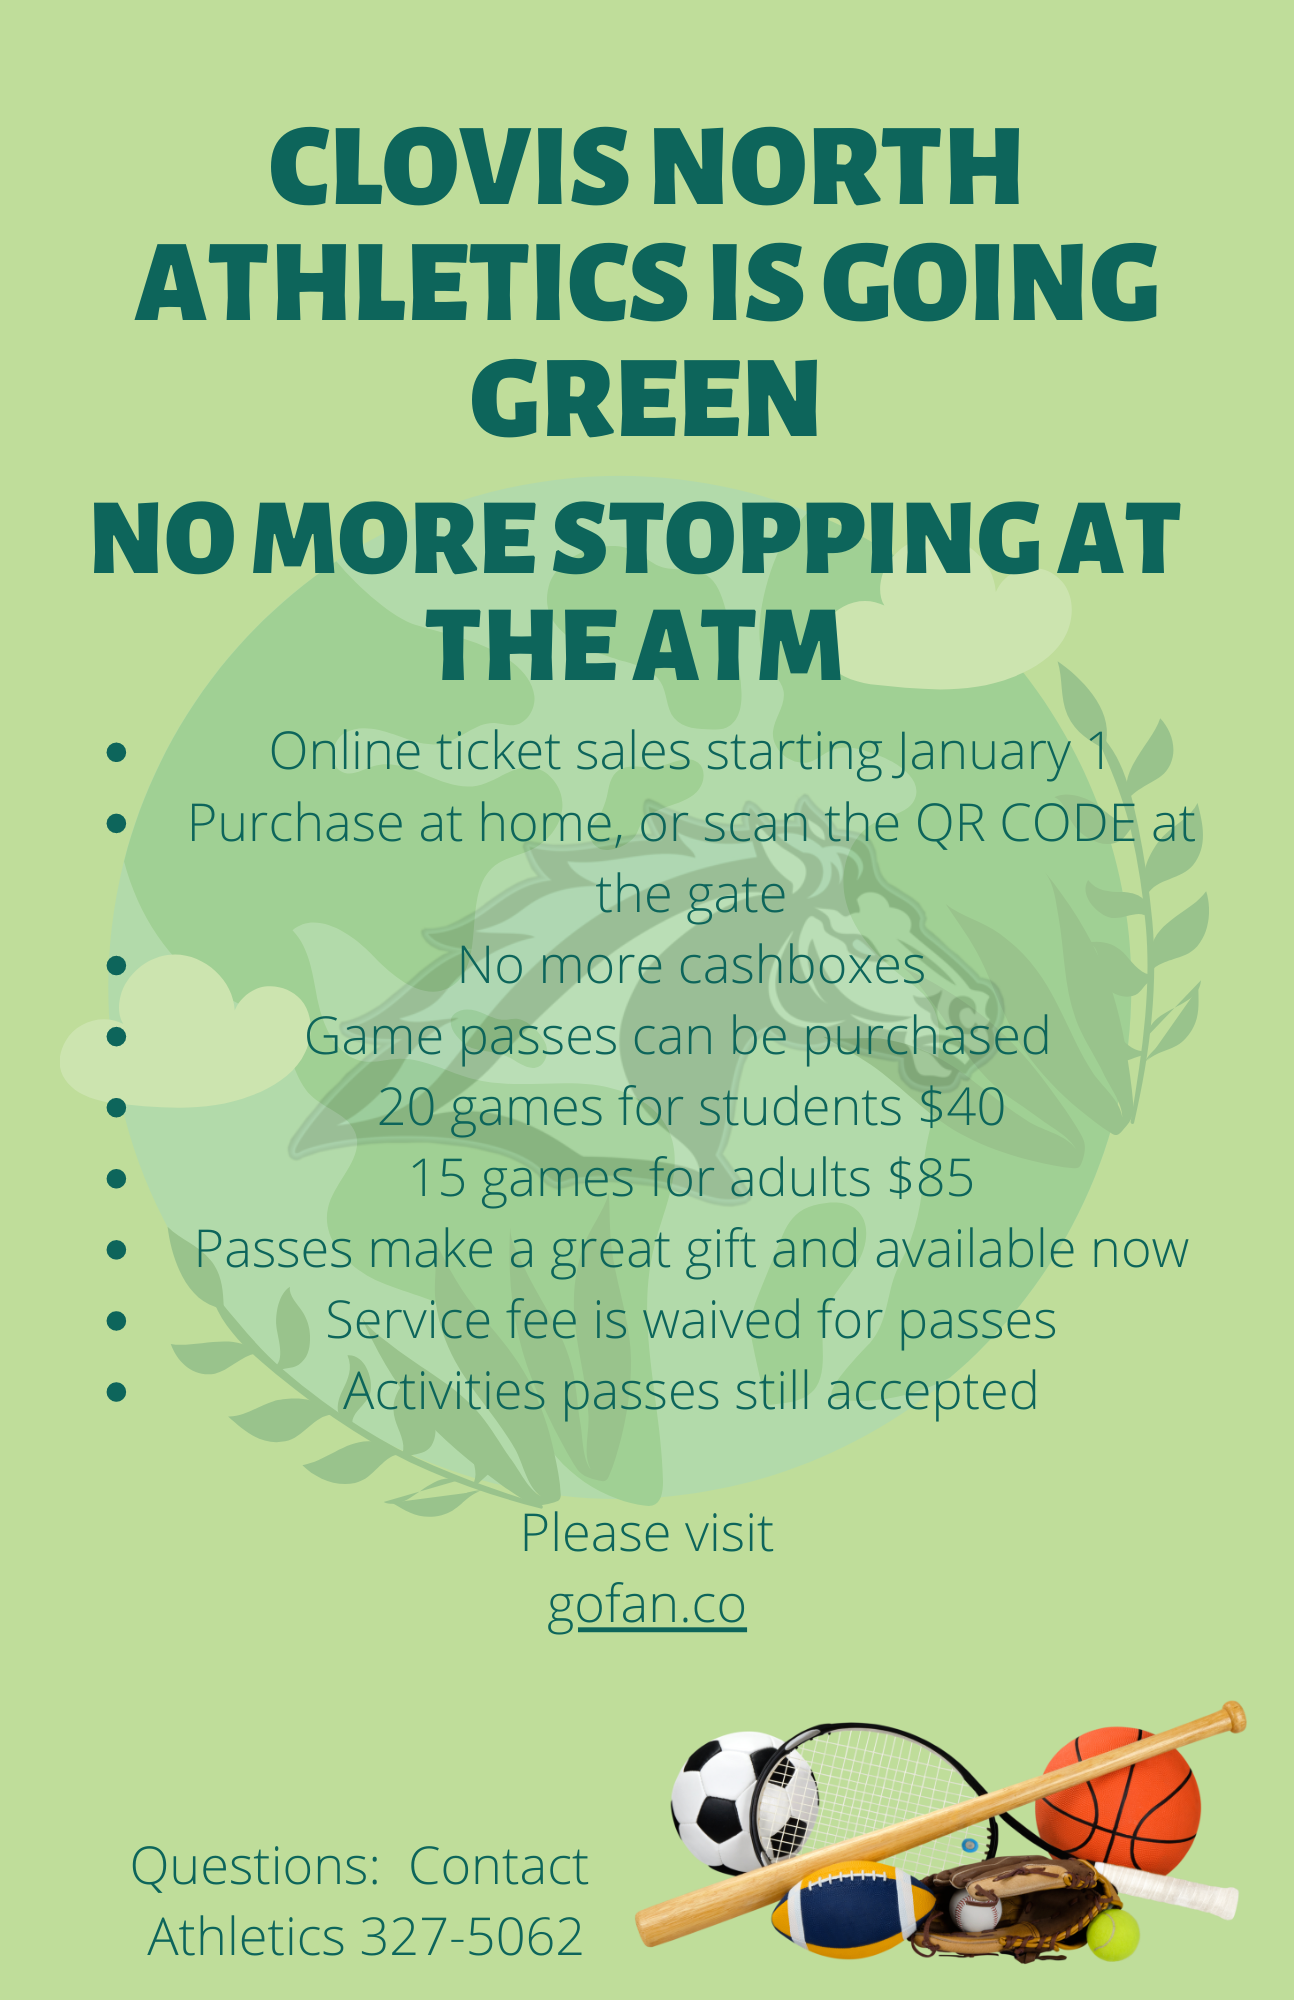 CN athletics is going green